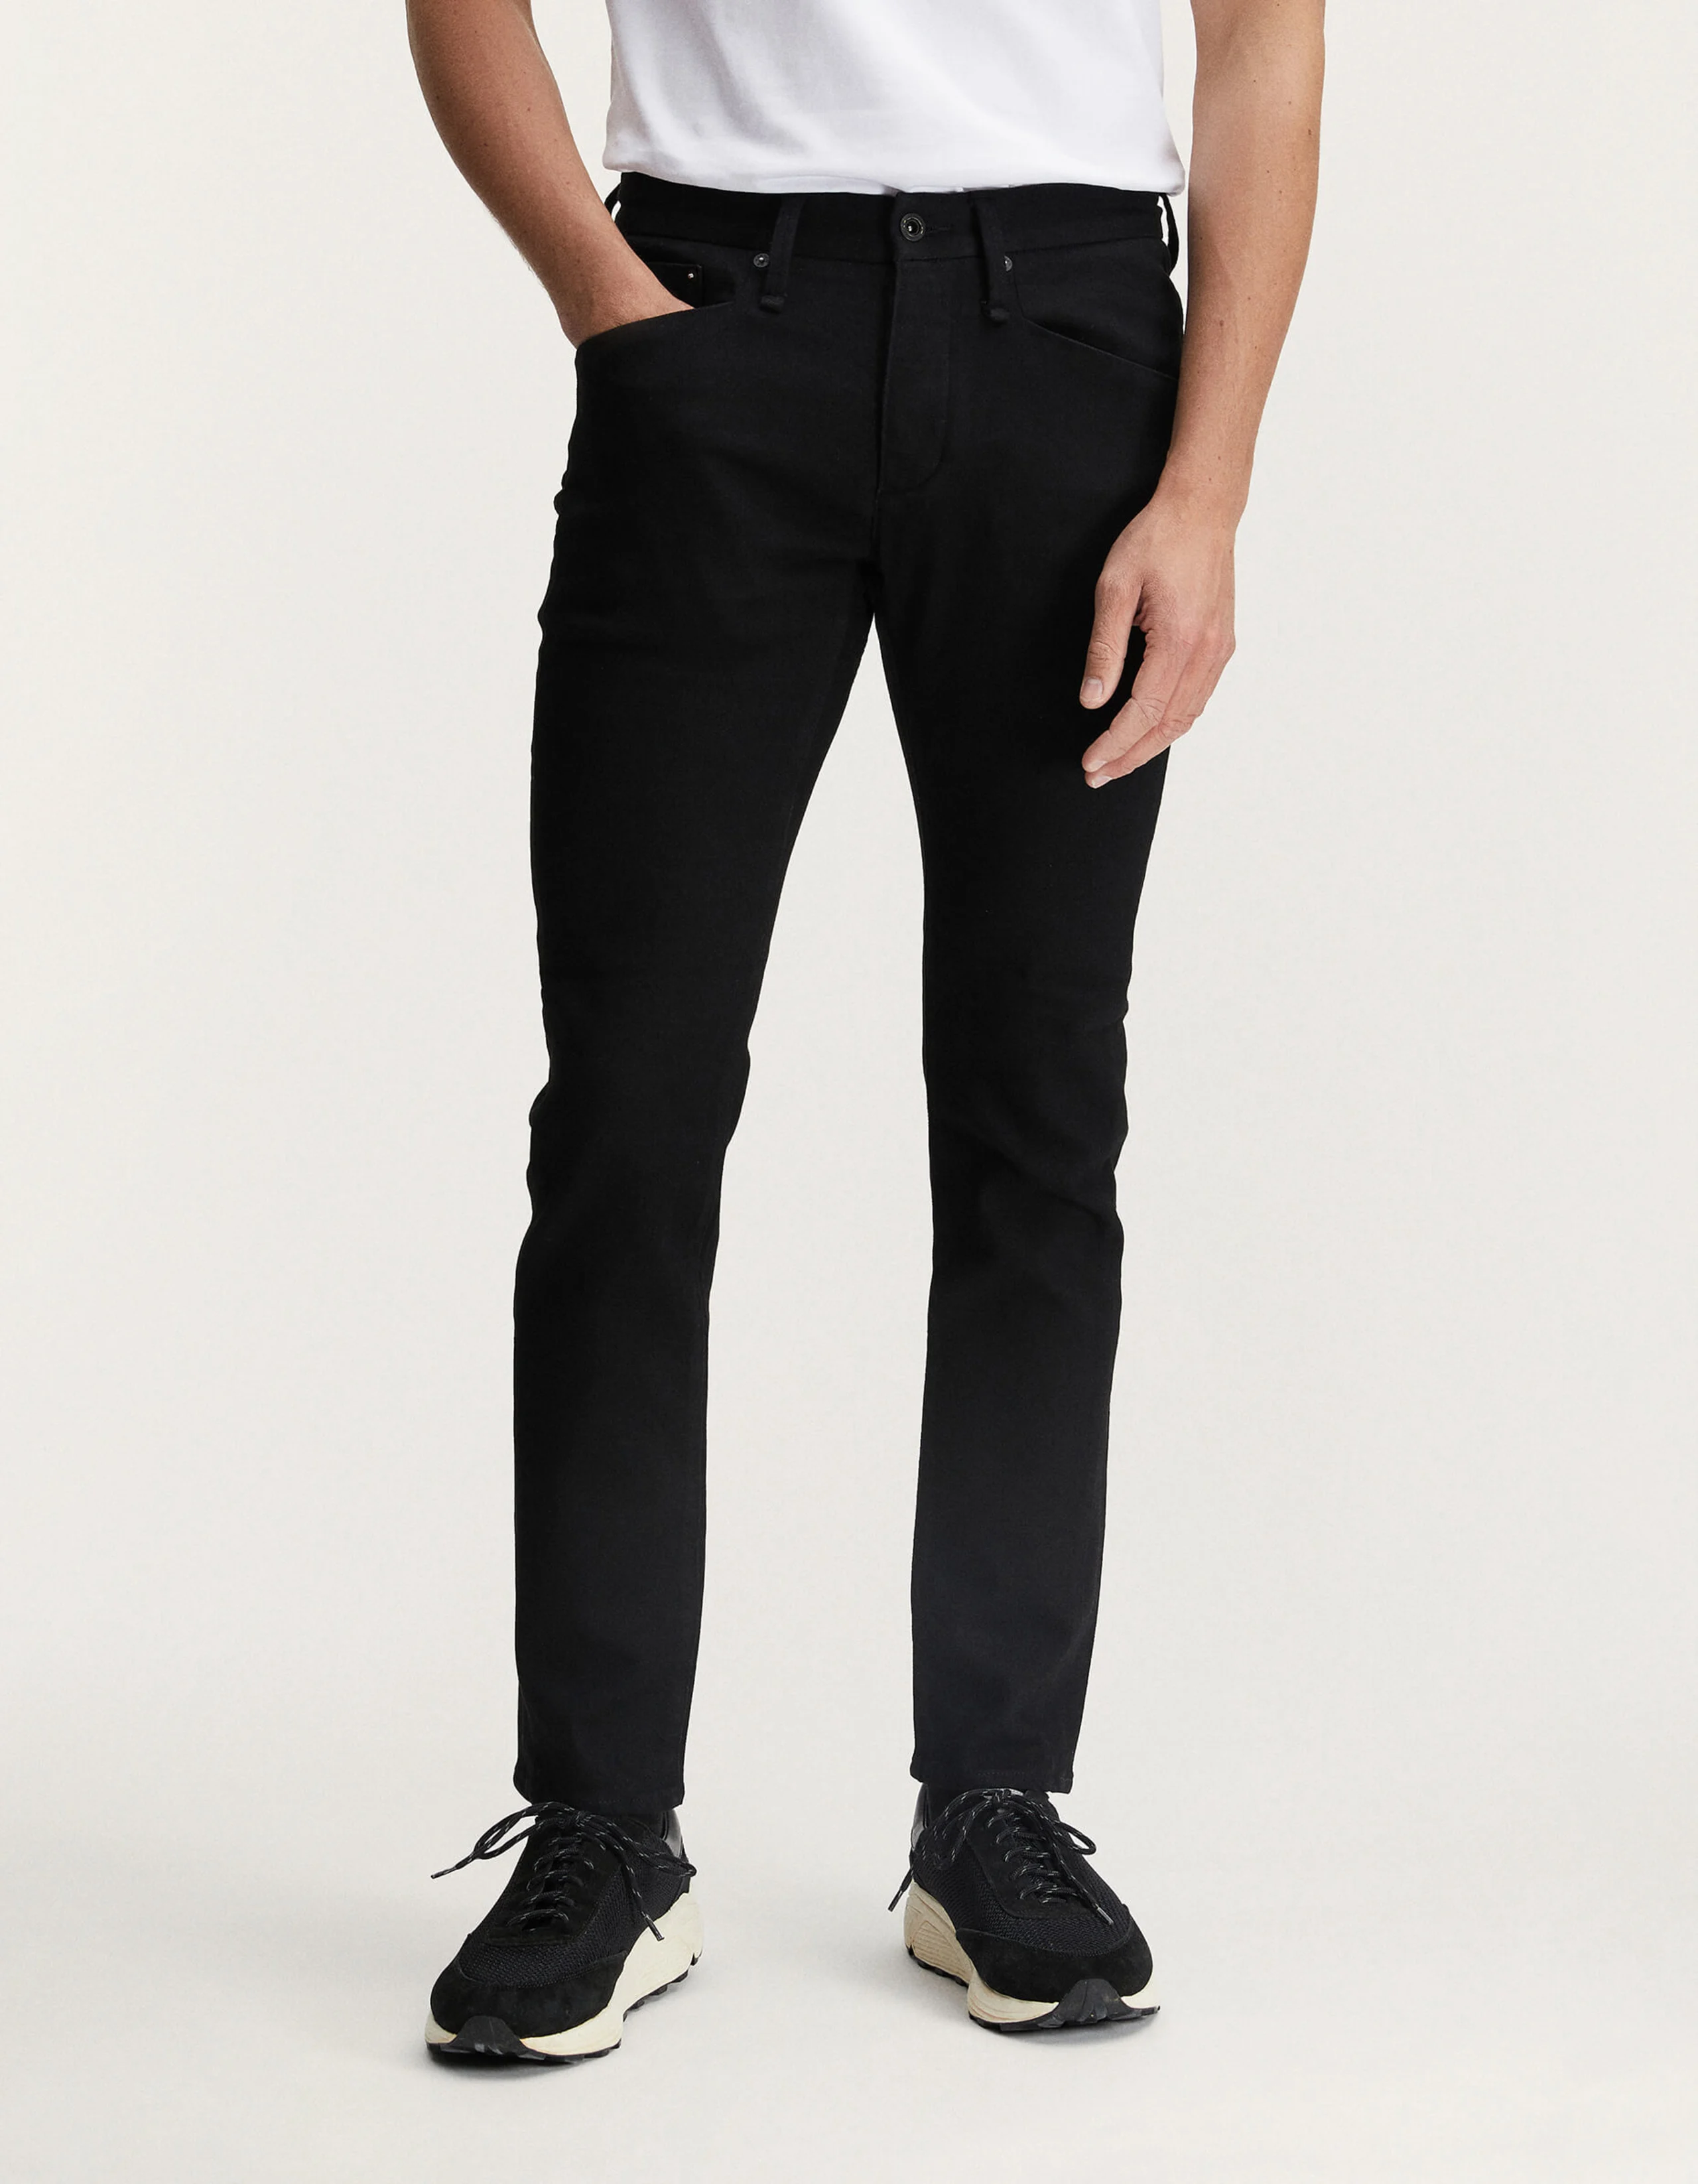 RAZOR TAILOR Stay-Black TROUSERS